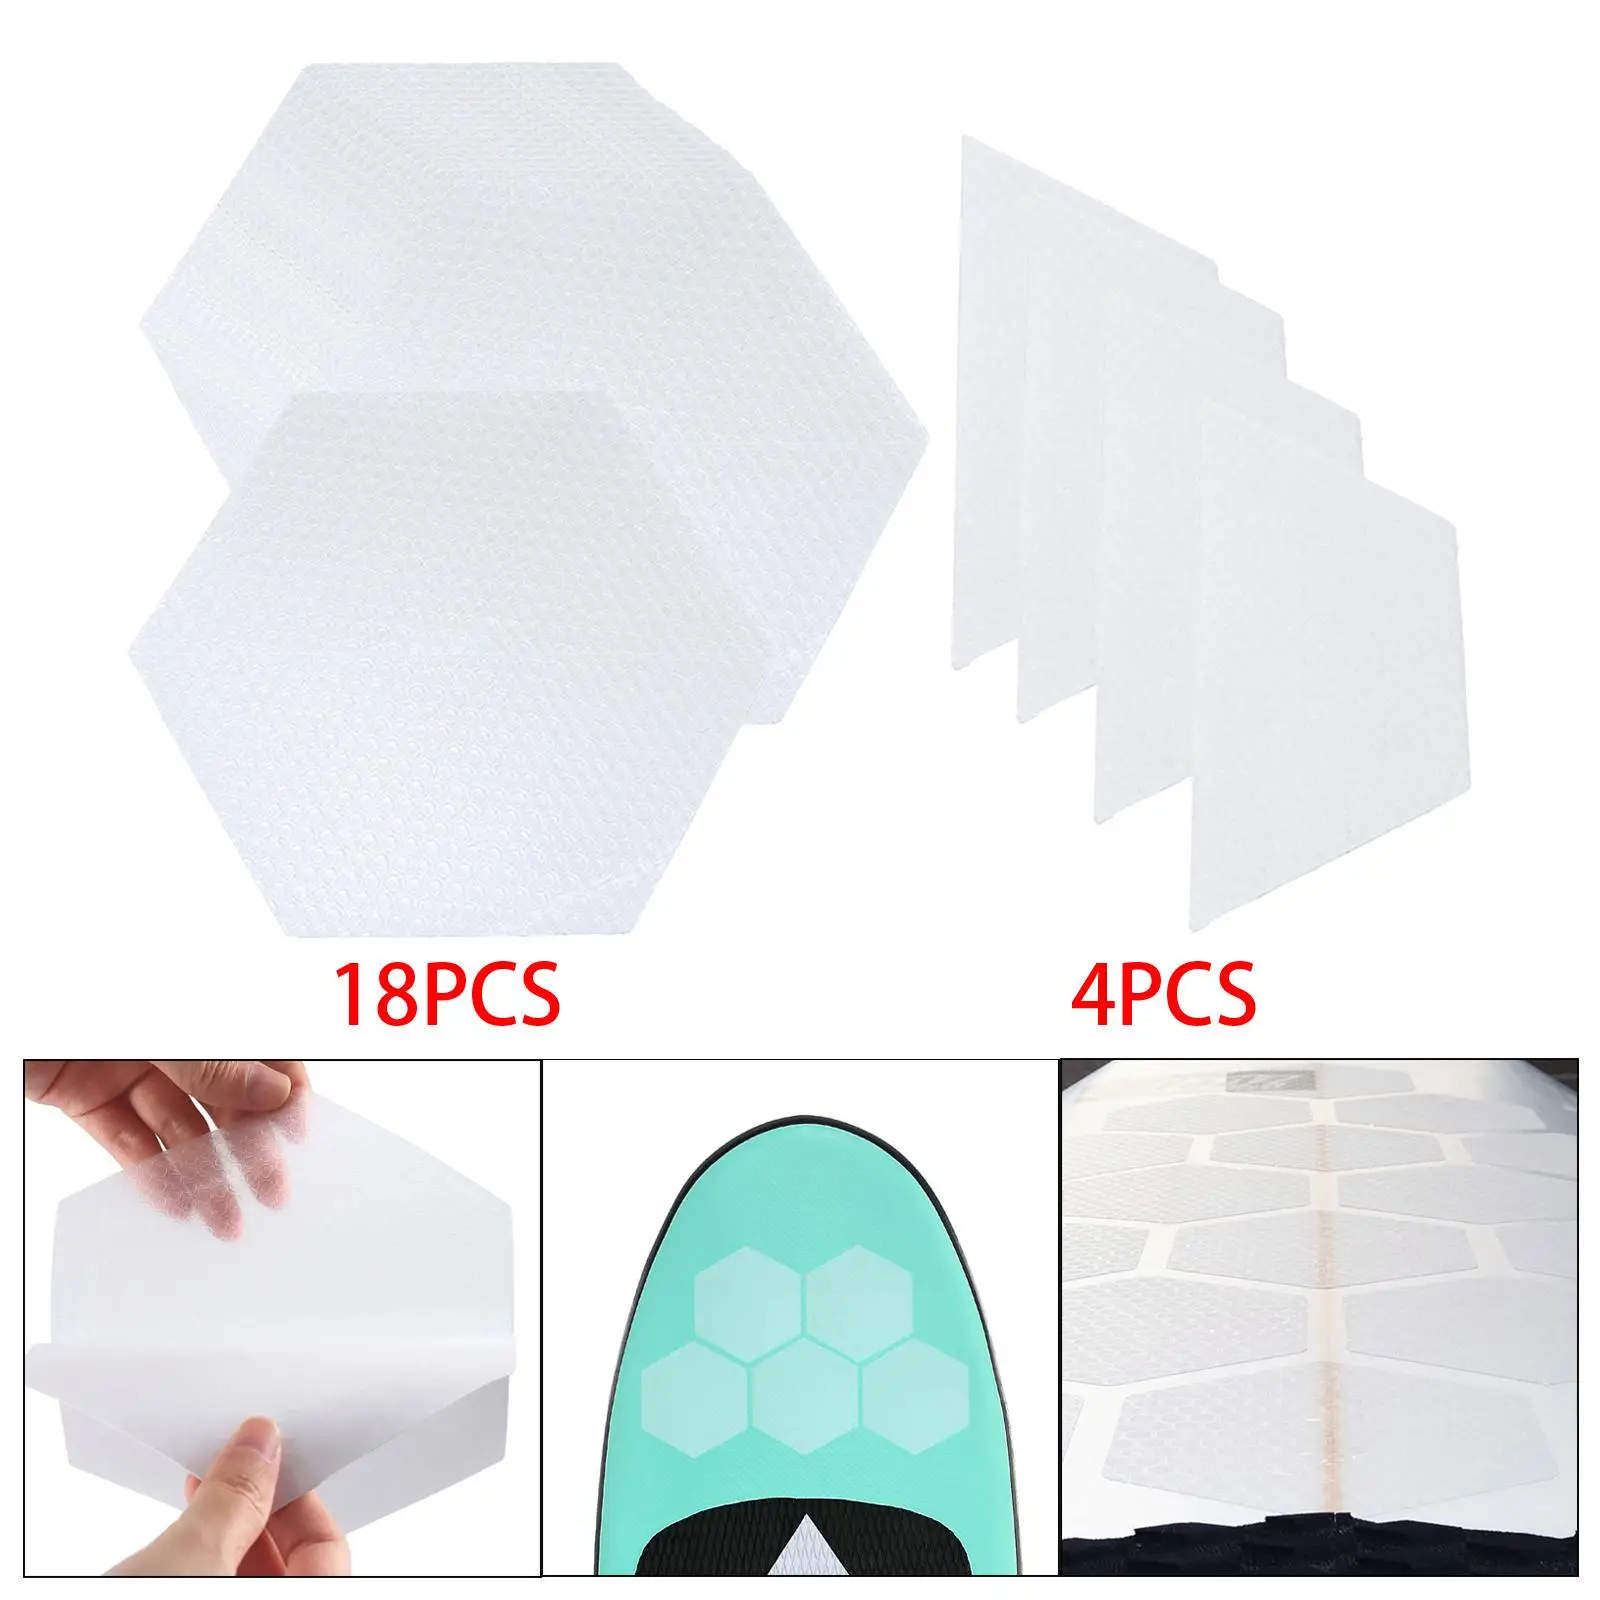 Adhesive Hexagon Surfboard Pads Water Surfing Accessories Deck Pads Surfpad